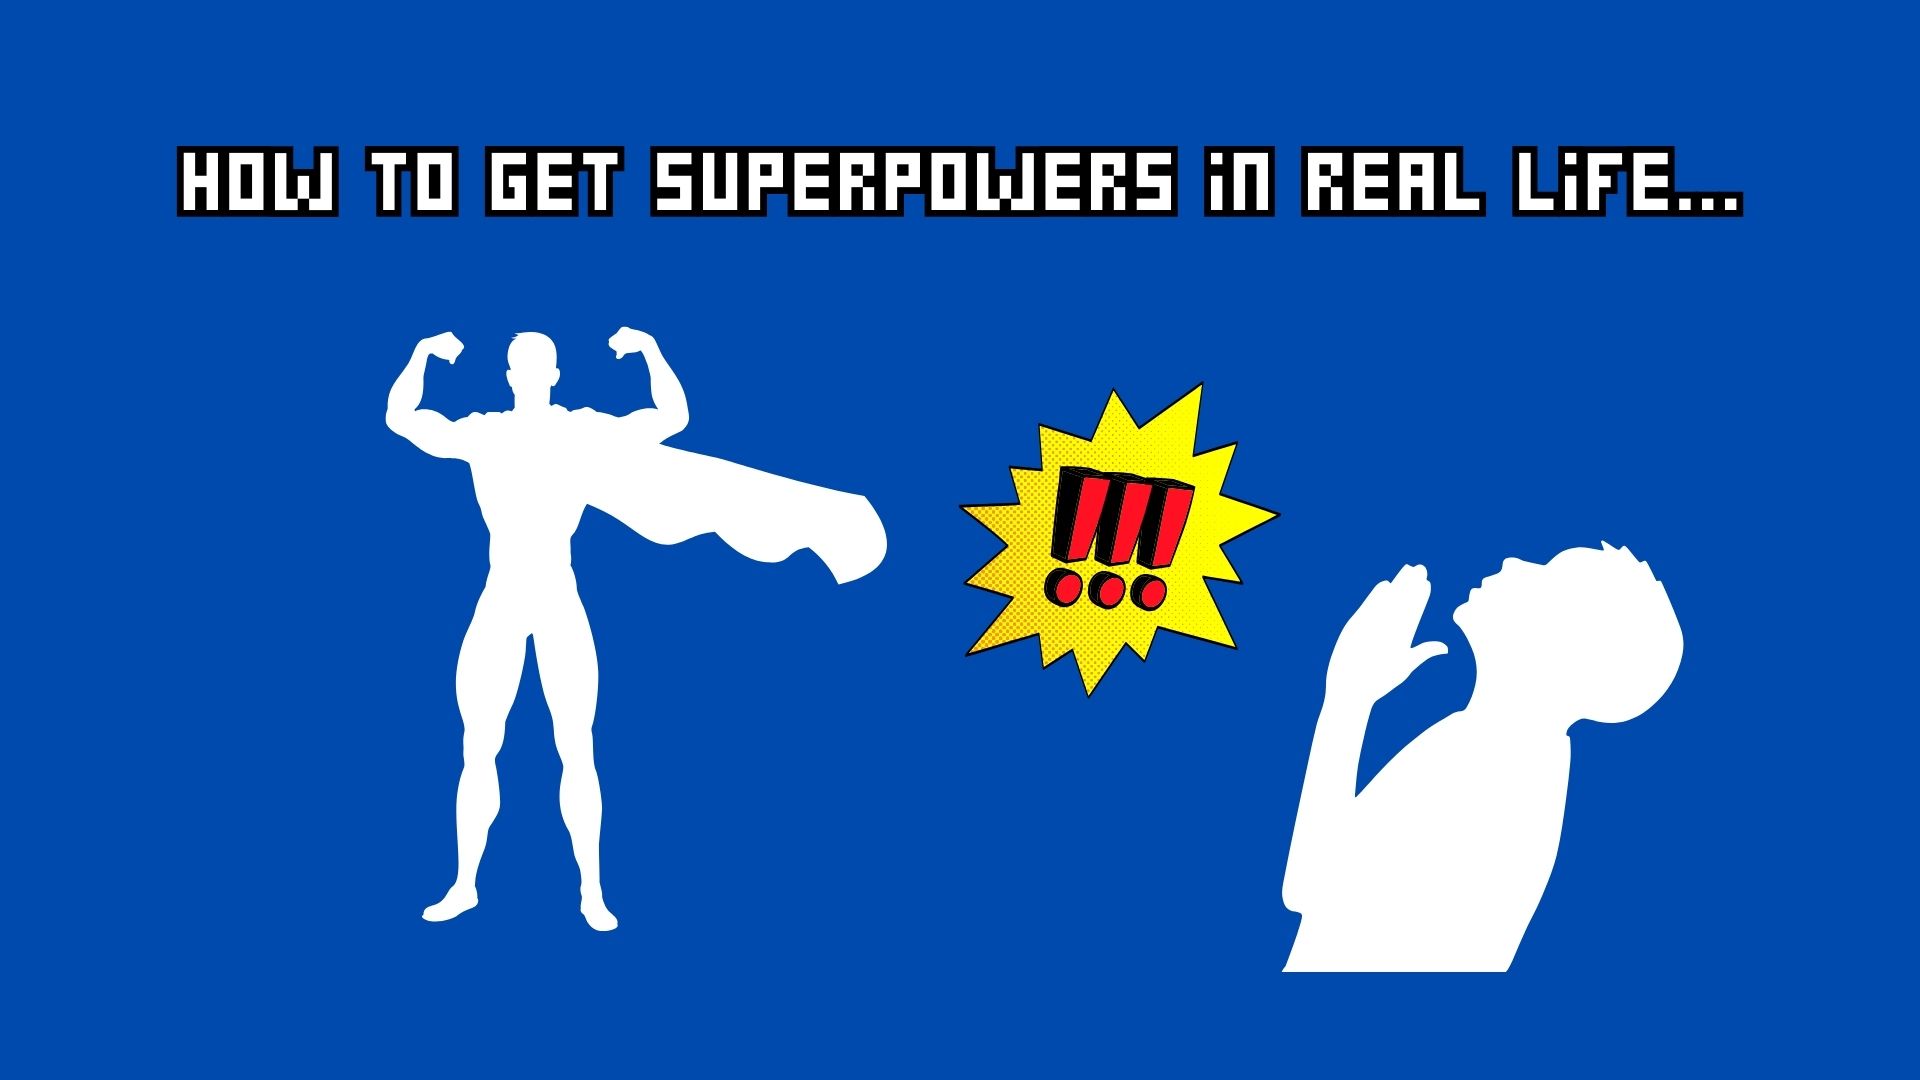 Abijah goes in detail about the secrets of getting superpowers in real life!